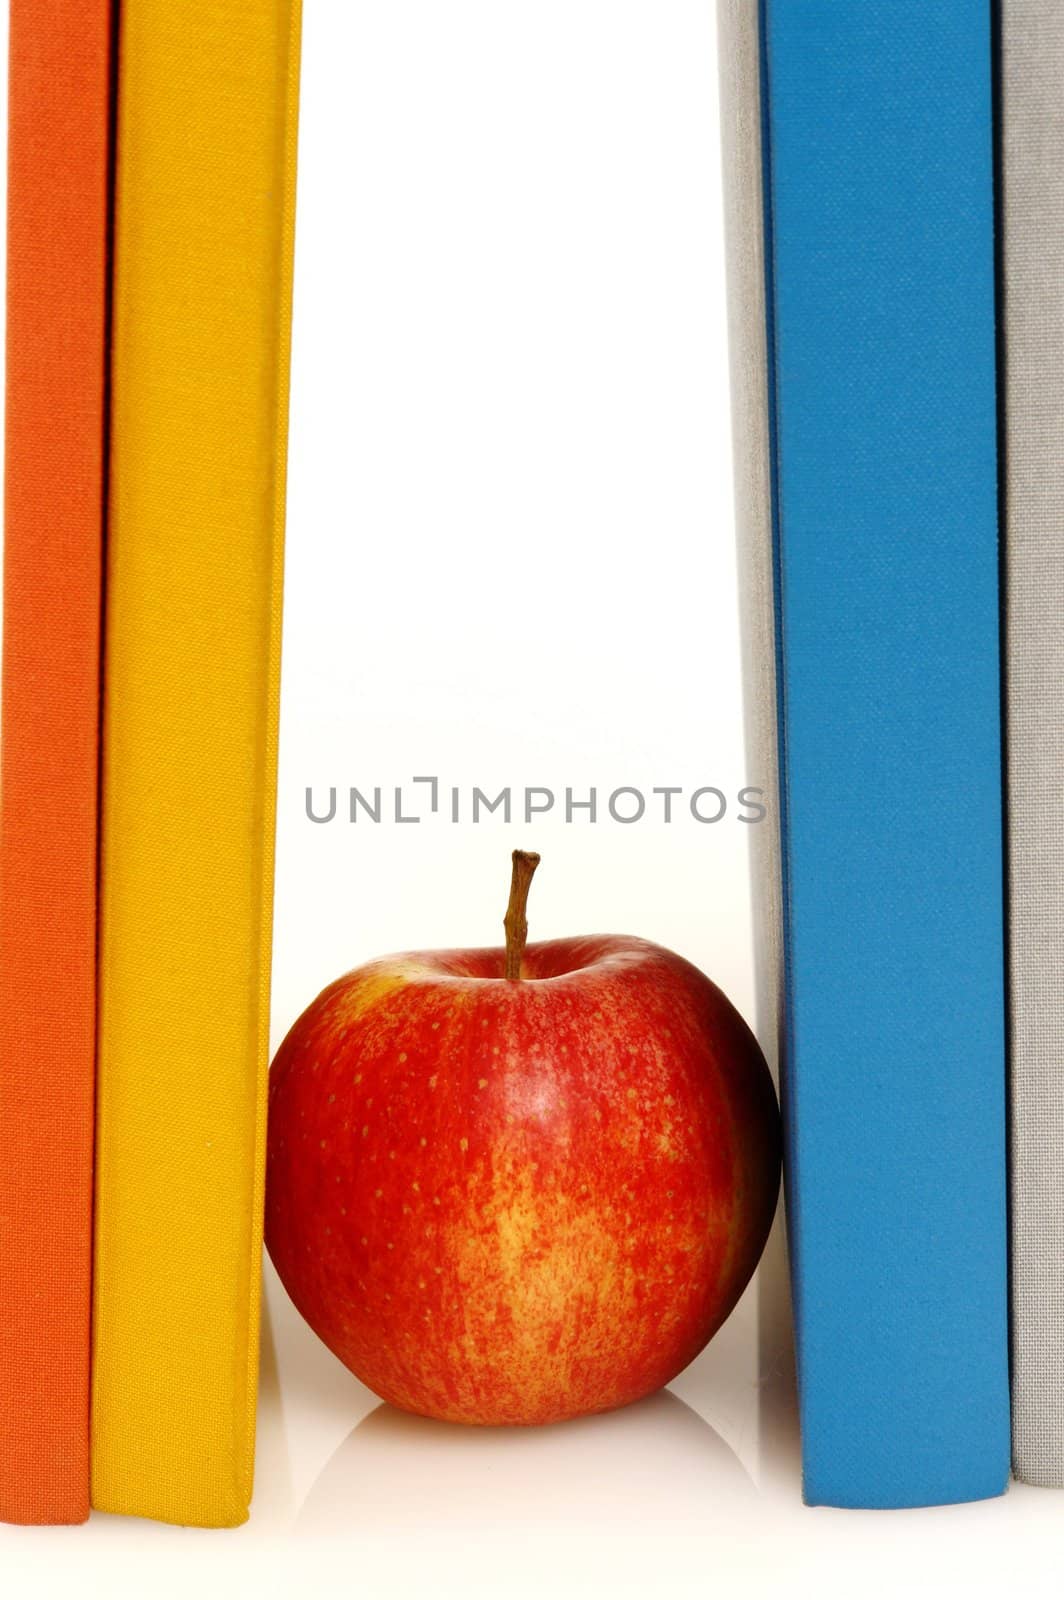 A book stack with some apples on it